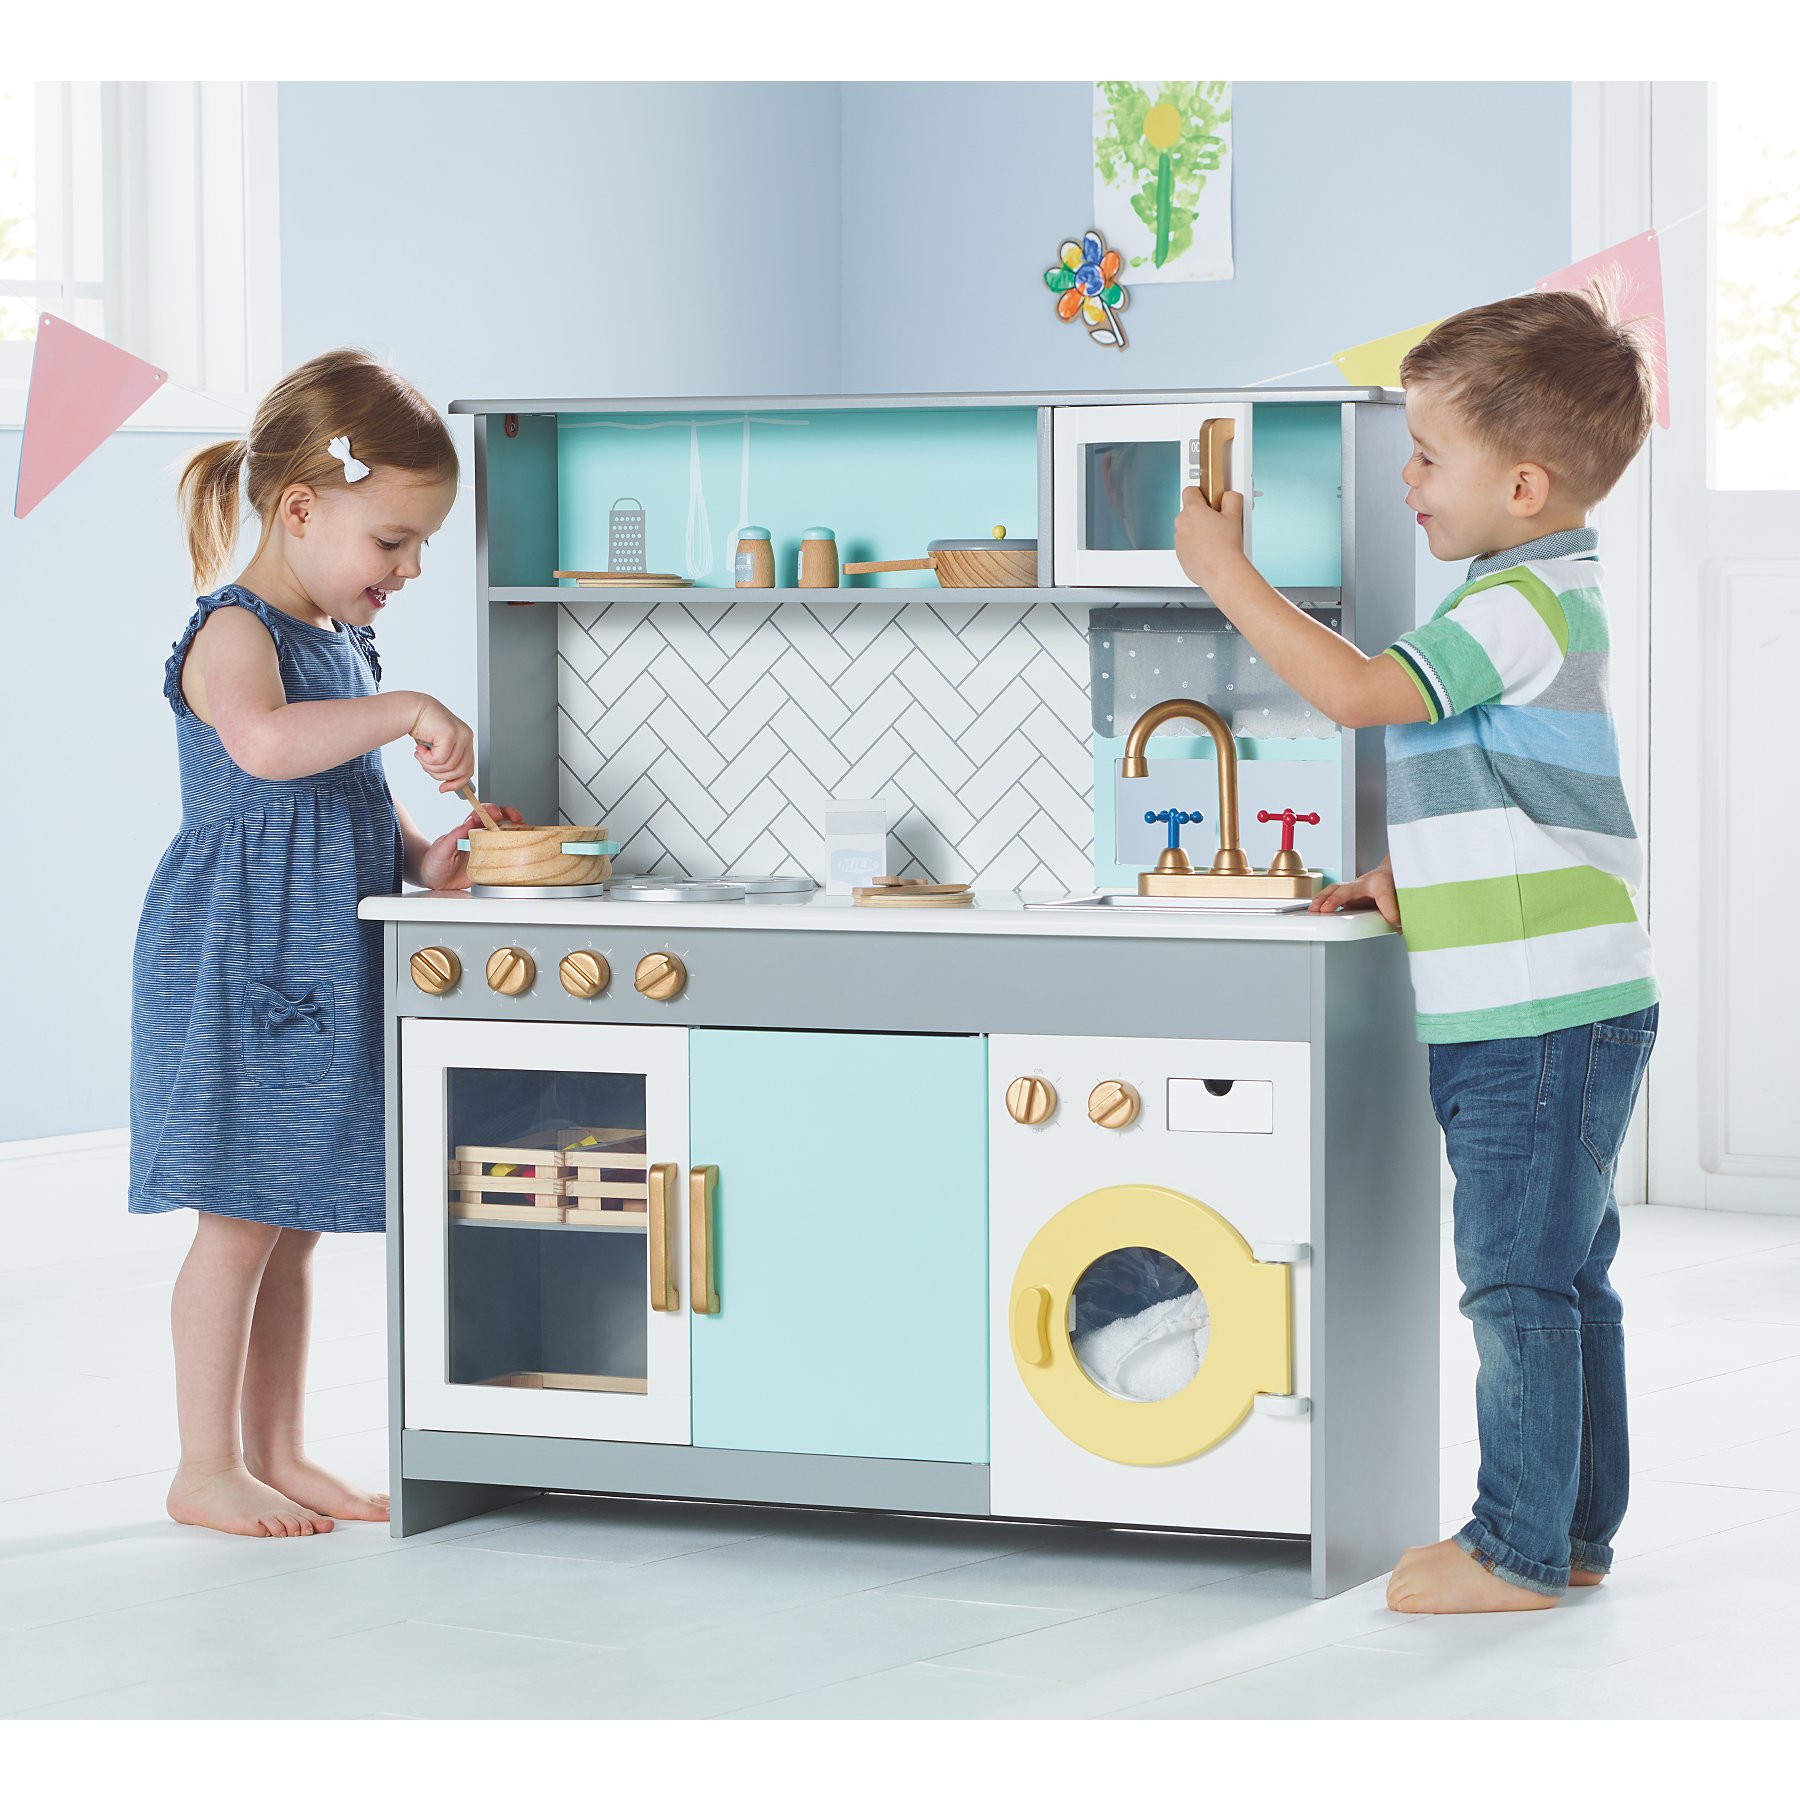 George Home Wooden Kitchen With Washing Machine Toys Character